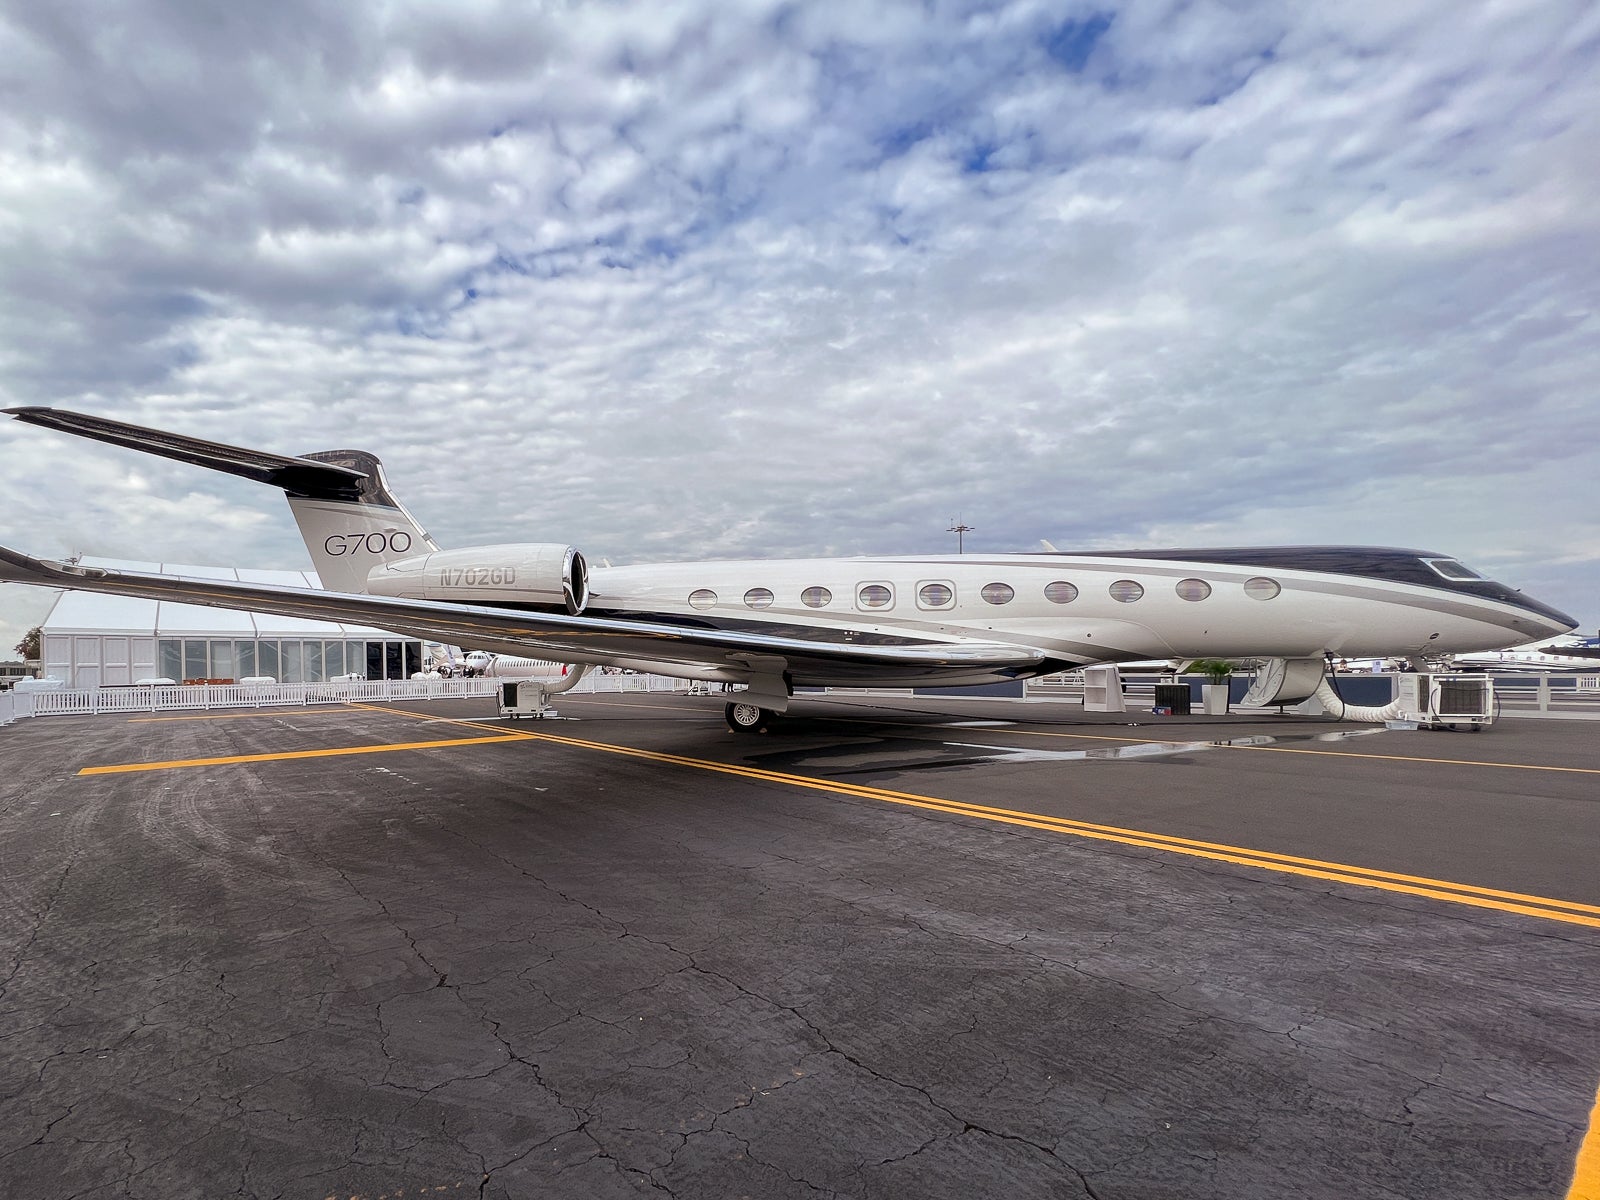 Inside the Gulfstream G700, a $75 million private jet that can fly from New York to India